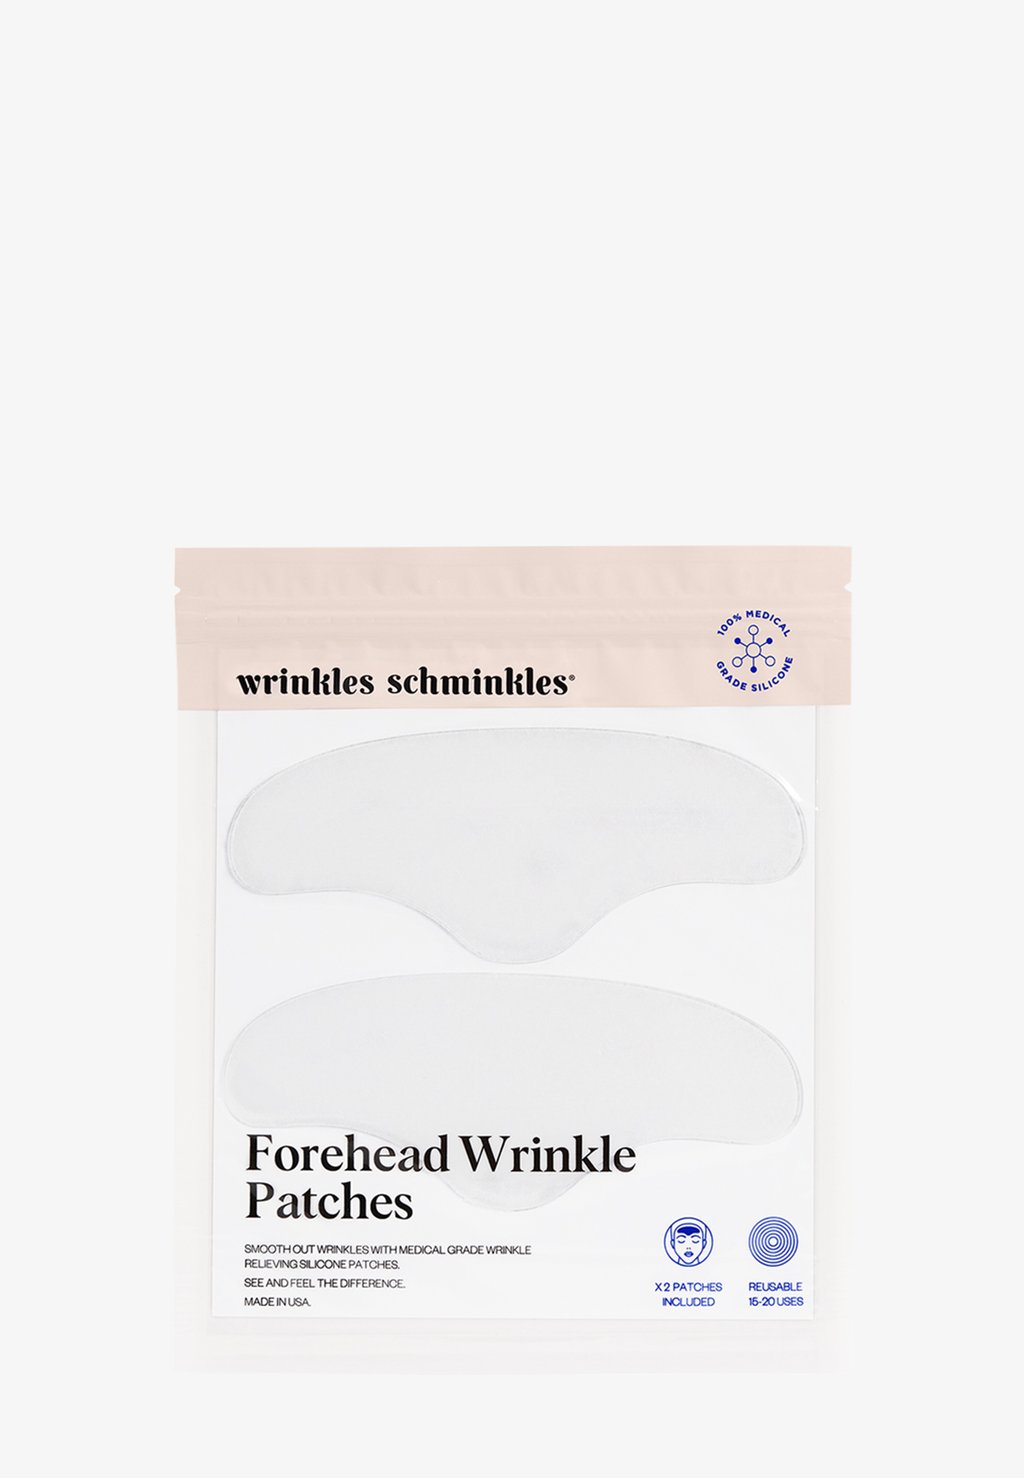 Маска для лица Forehead Wrinkle Patches Wrinkles Schminkles forehead wrinkles removal patch fade wrinkle forehead firming mask frown lines treatment law pattern stickers skin care 5pcs